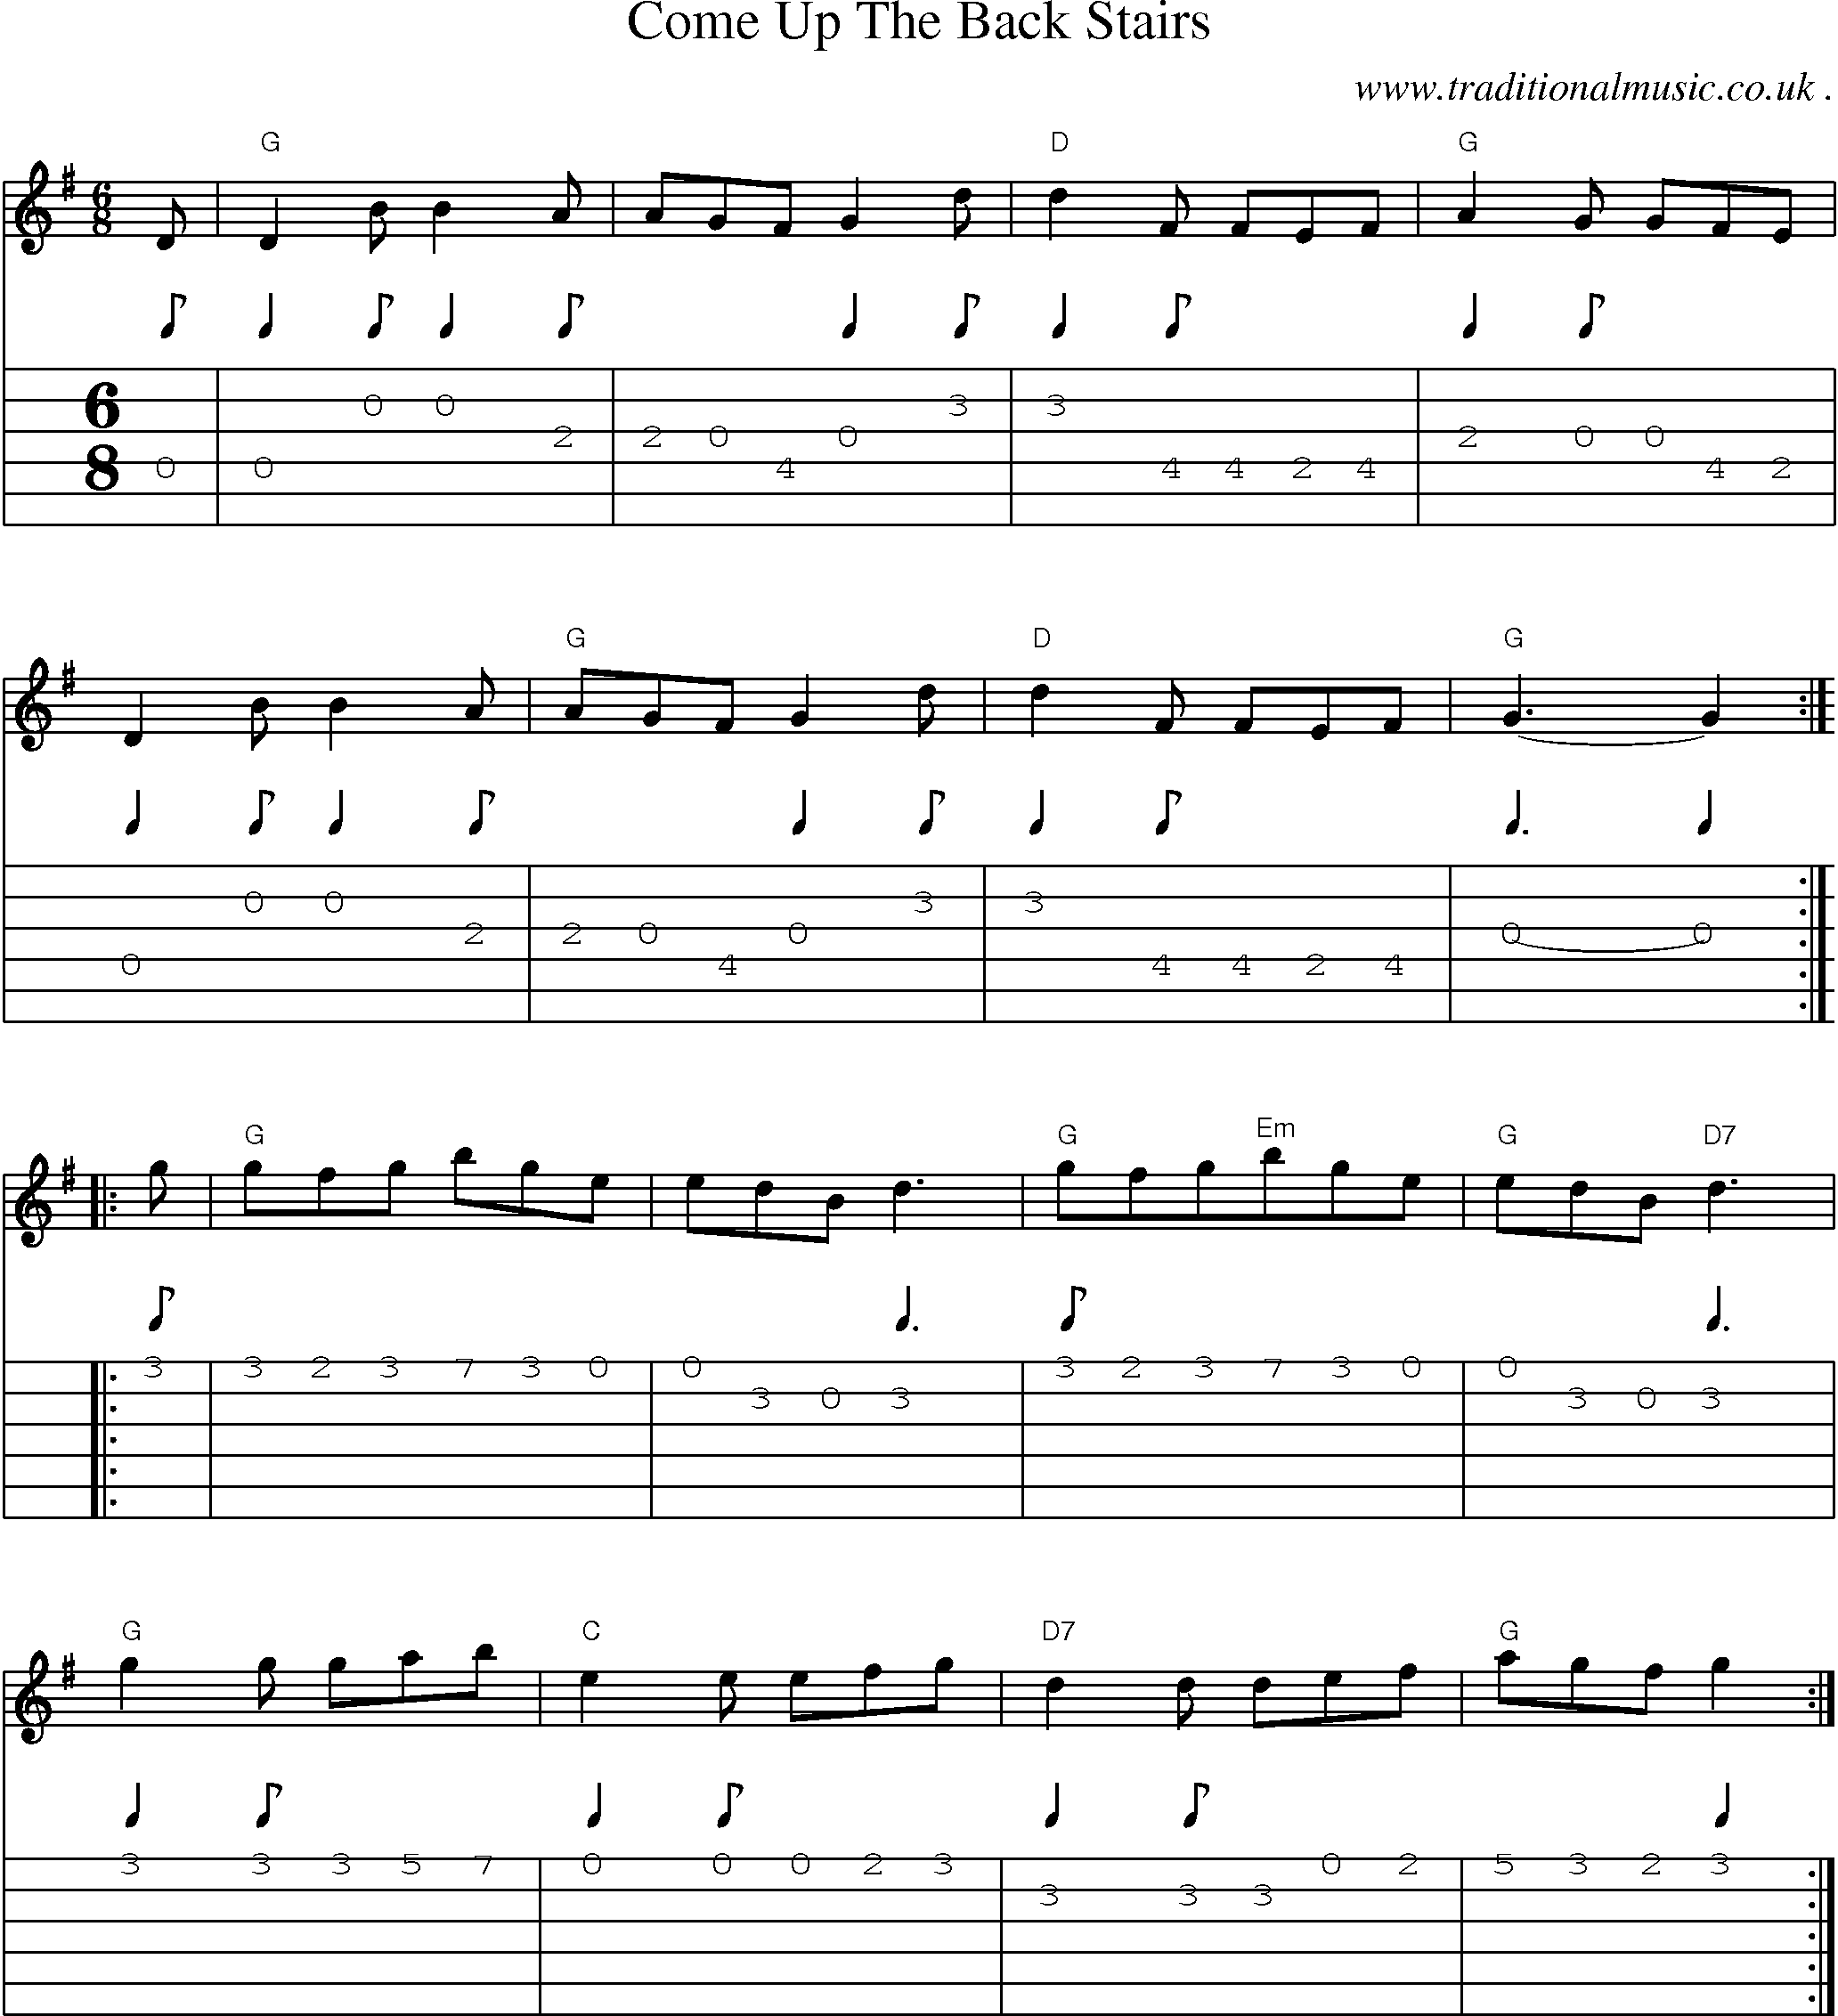 Sheet-Music and Guitar Tabs for Come Up The Back Stairs